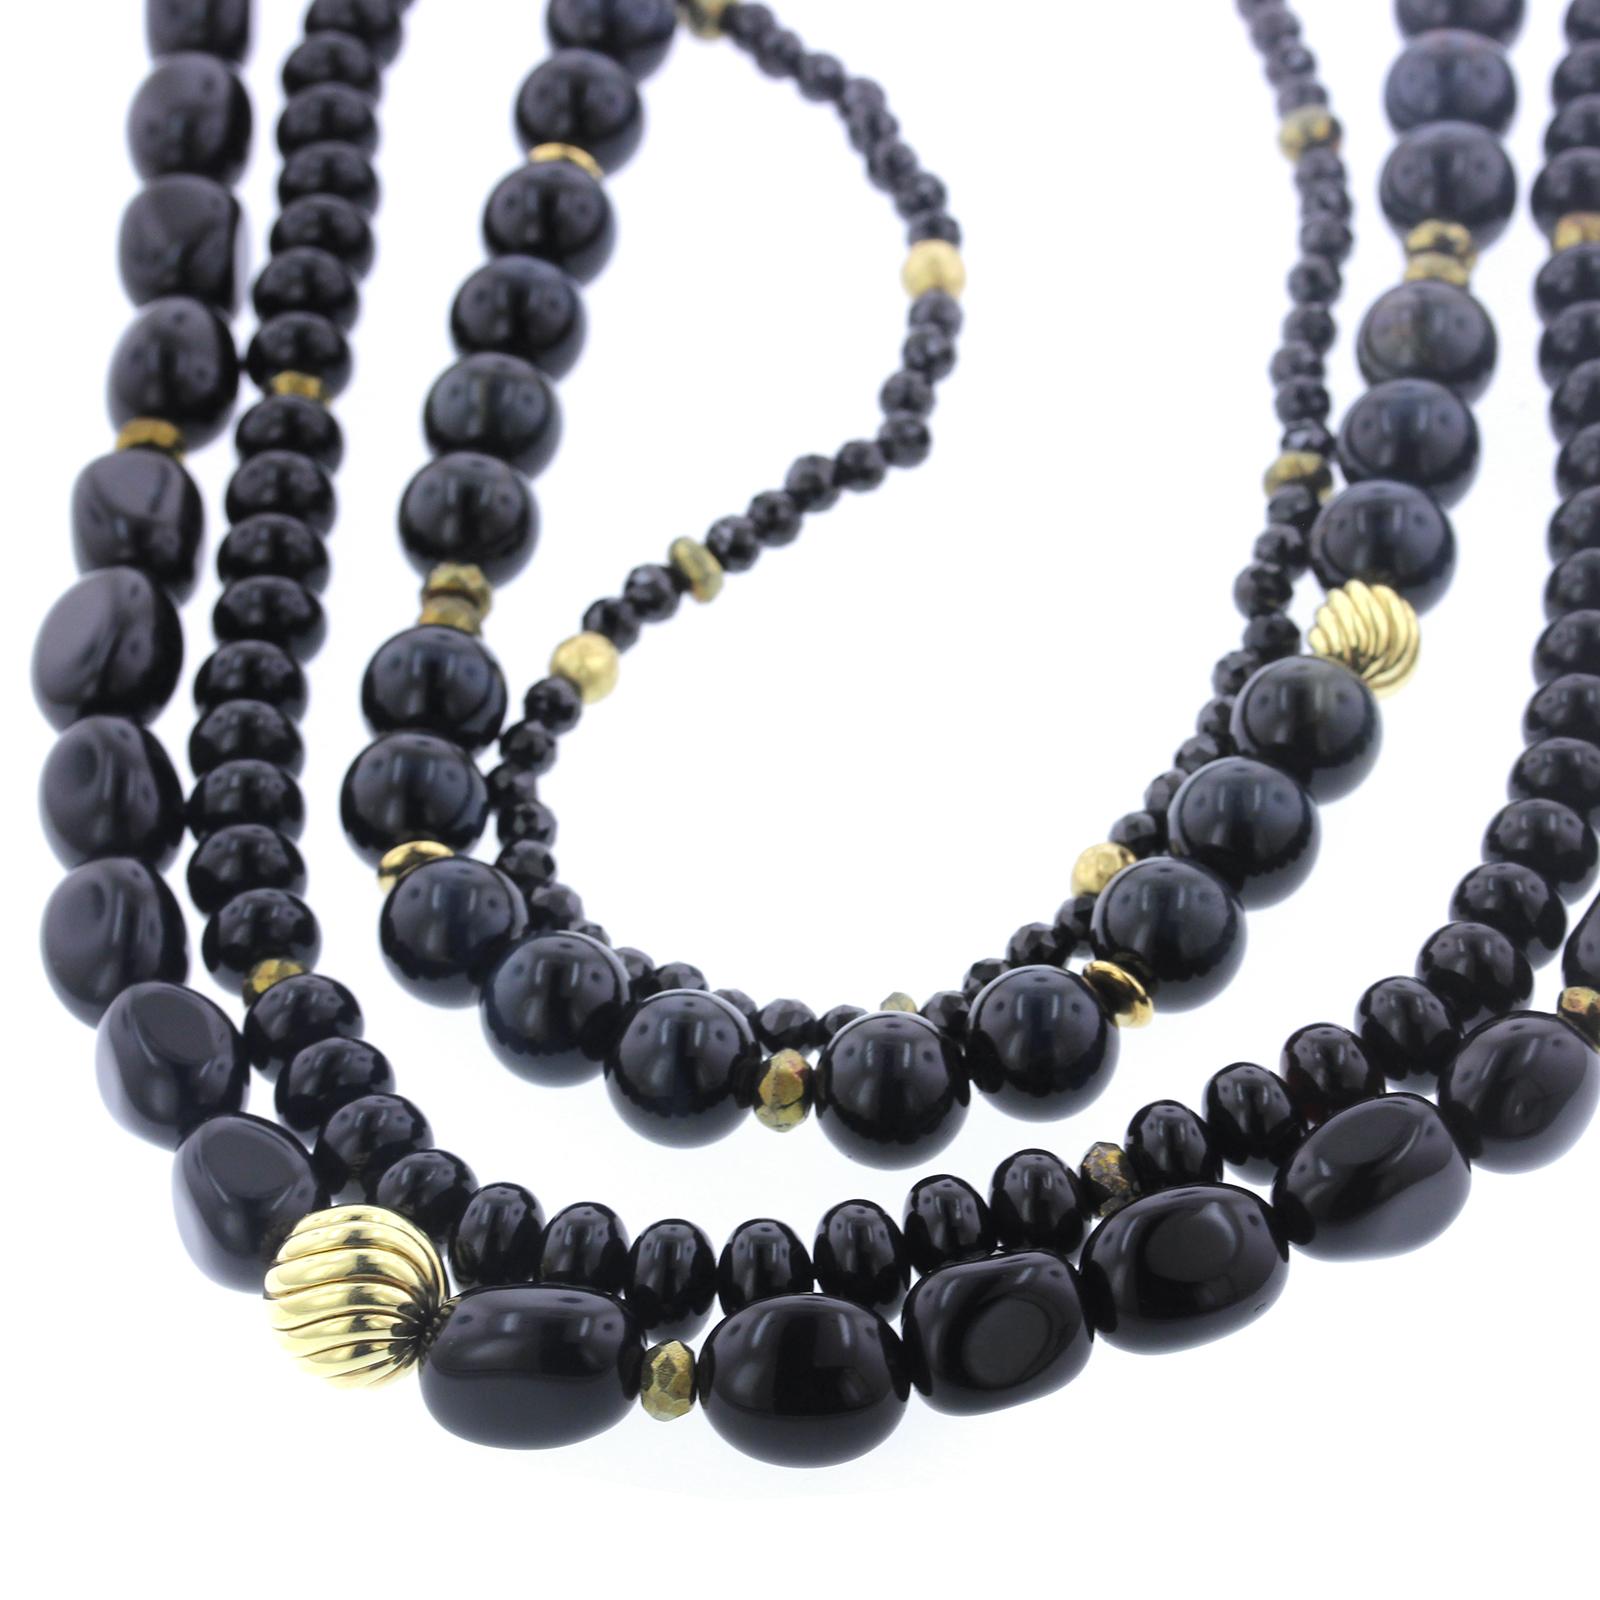 David Yurman Couture 18K Yellow Gold Black Onyx and Obsidian Bead Necklace. The
necklace is designed with four strands of various shaped beads, completed by
an 18K gold clasp, length 18-24